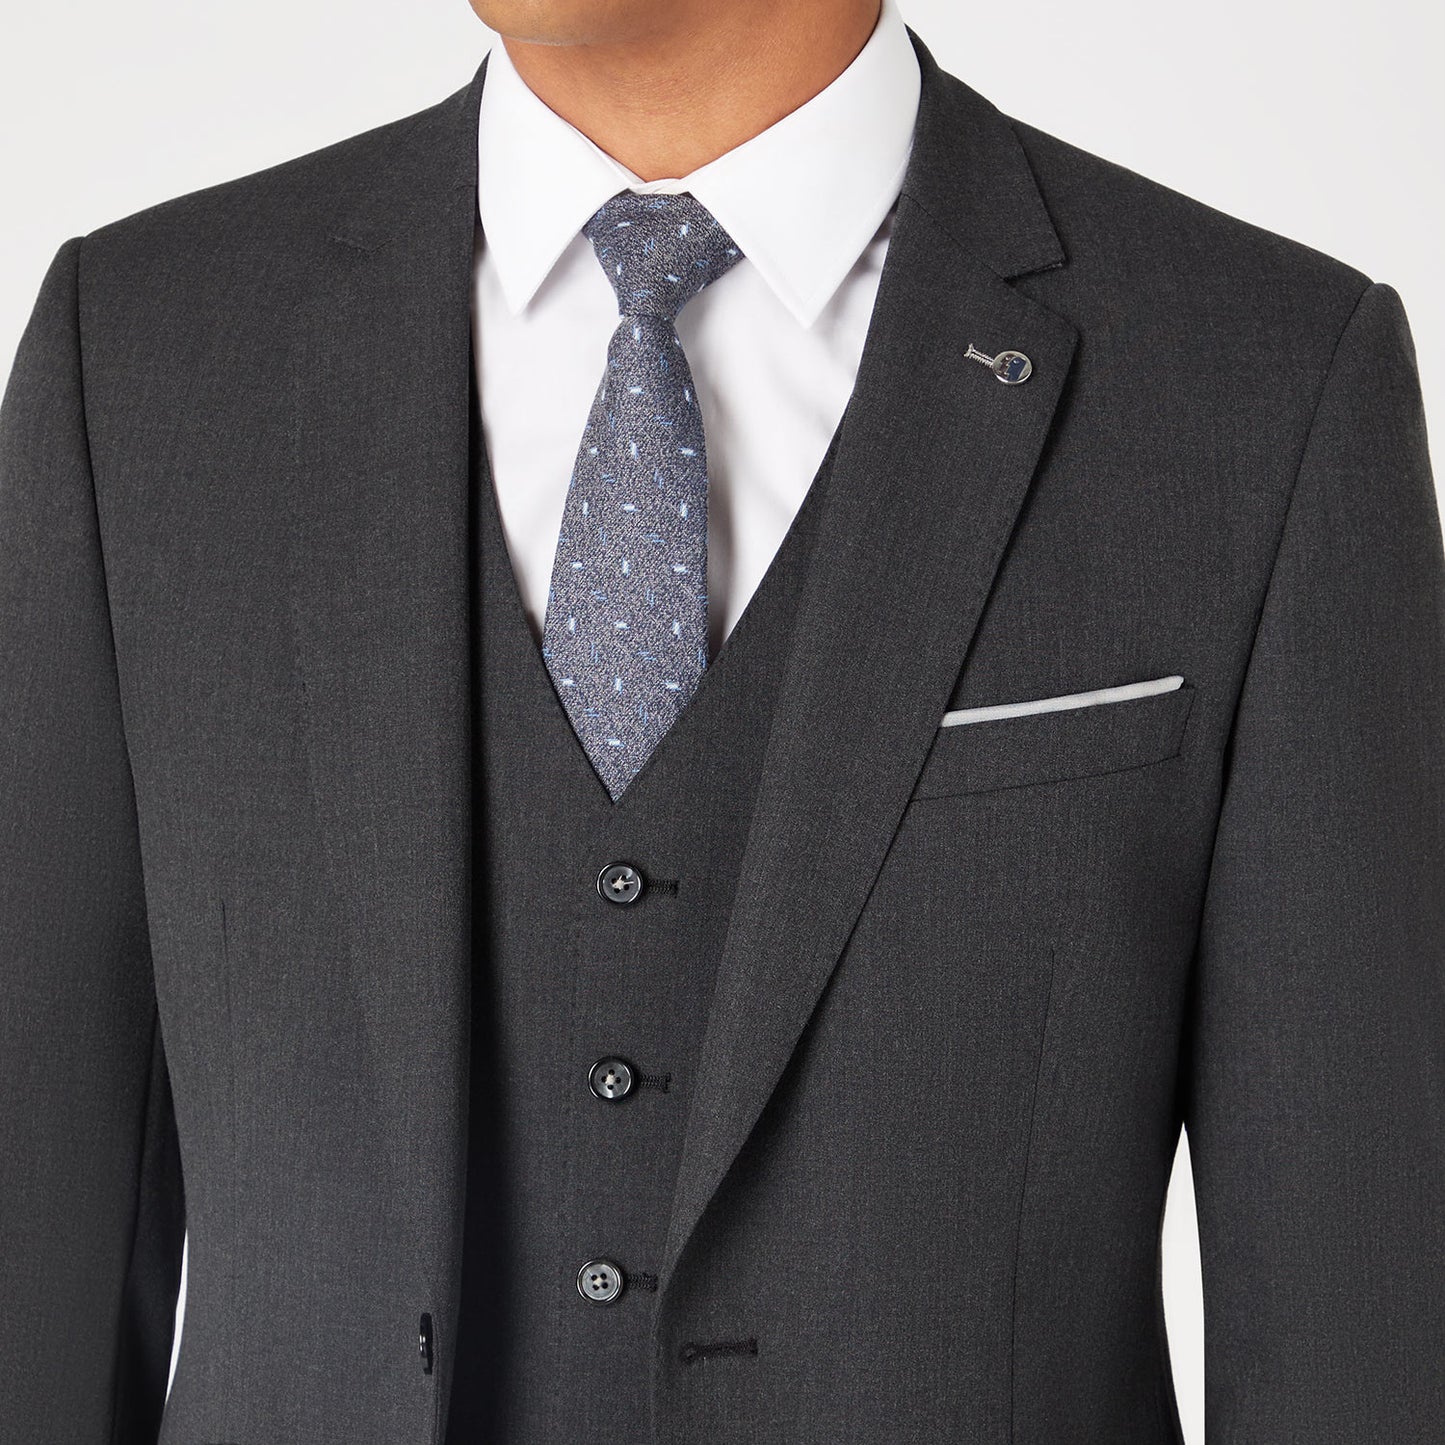 Remus Uomo 11770 08 Charcoal Tapered Suit Jacket